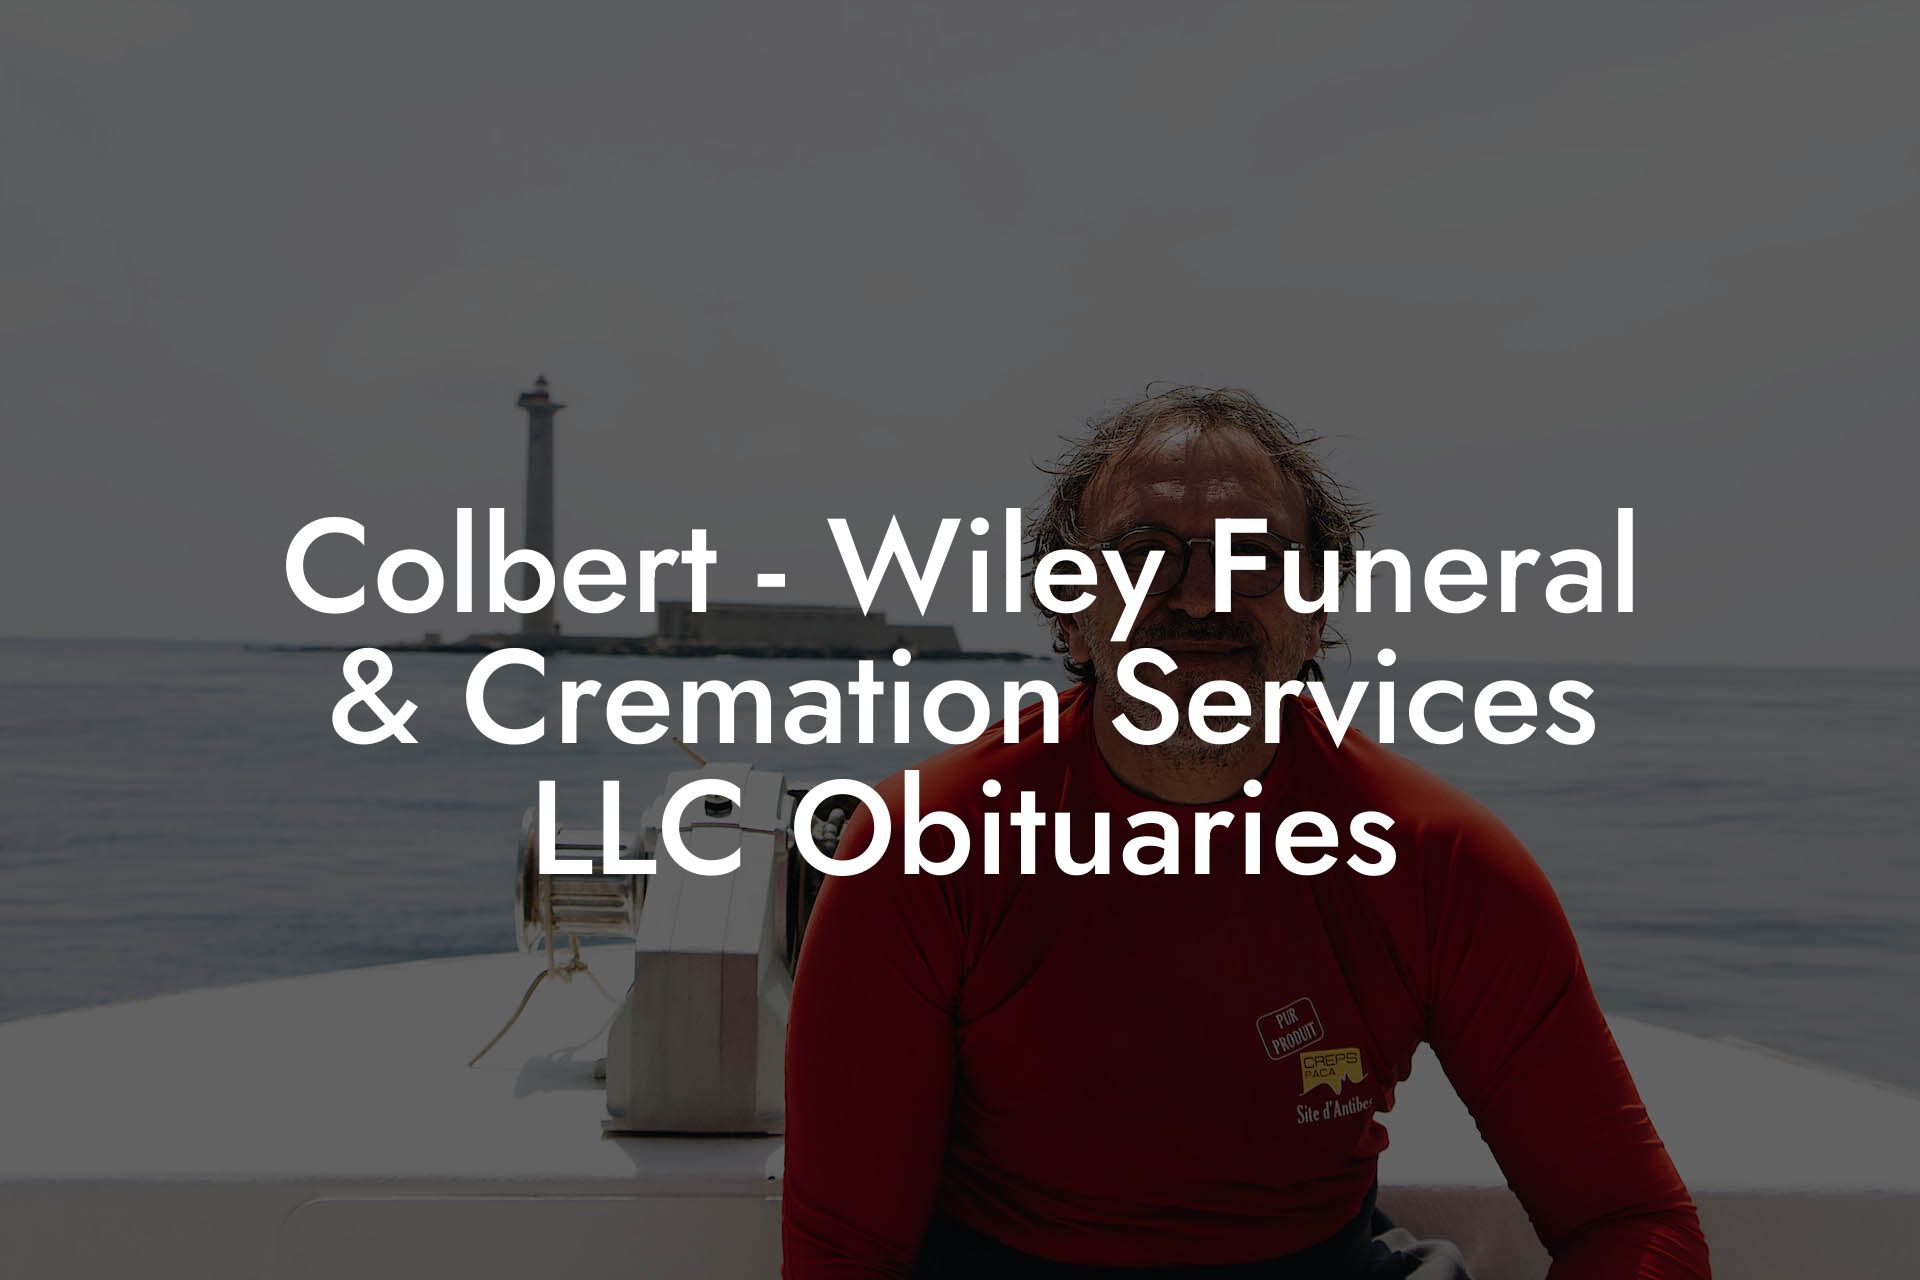 Colbert - Wiley Funeral & Cremation Services LLC Obituaries